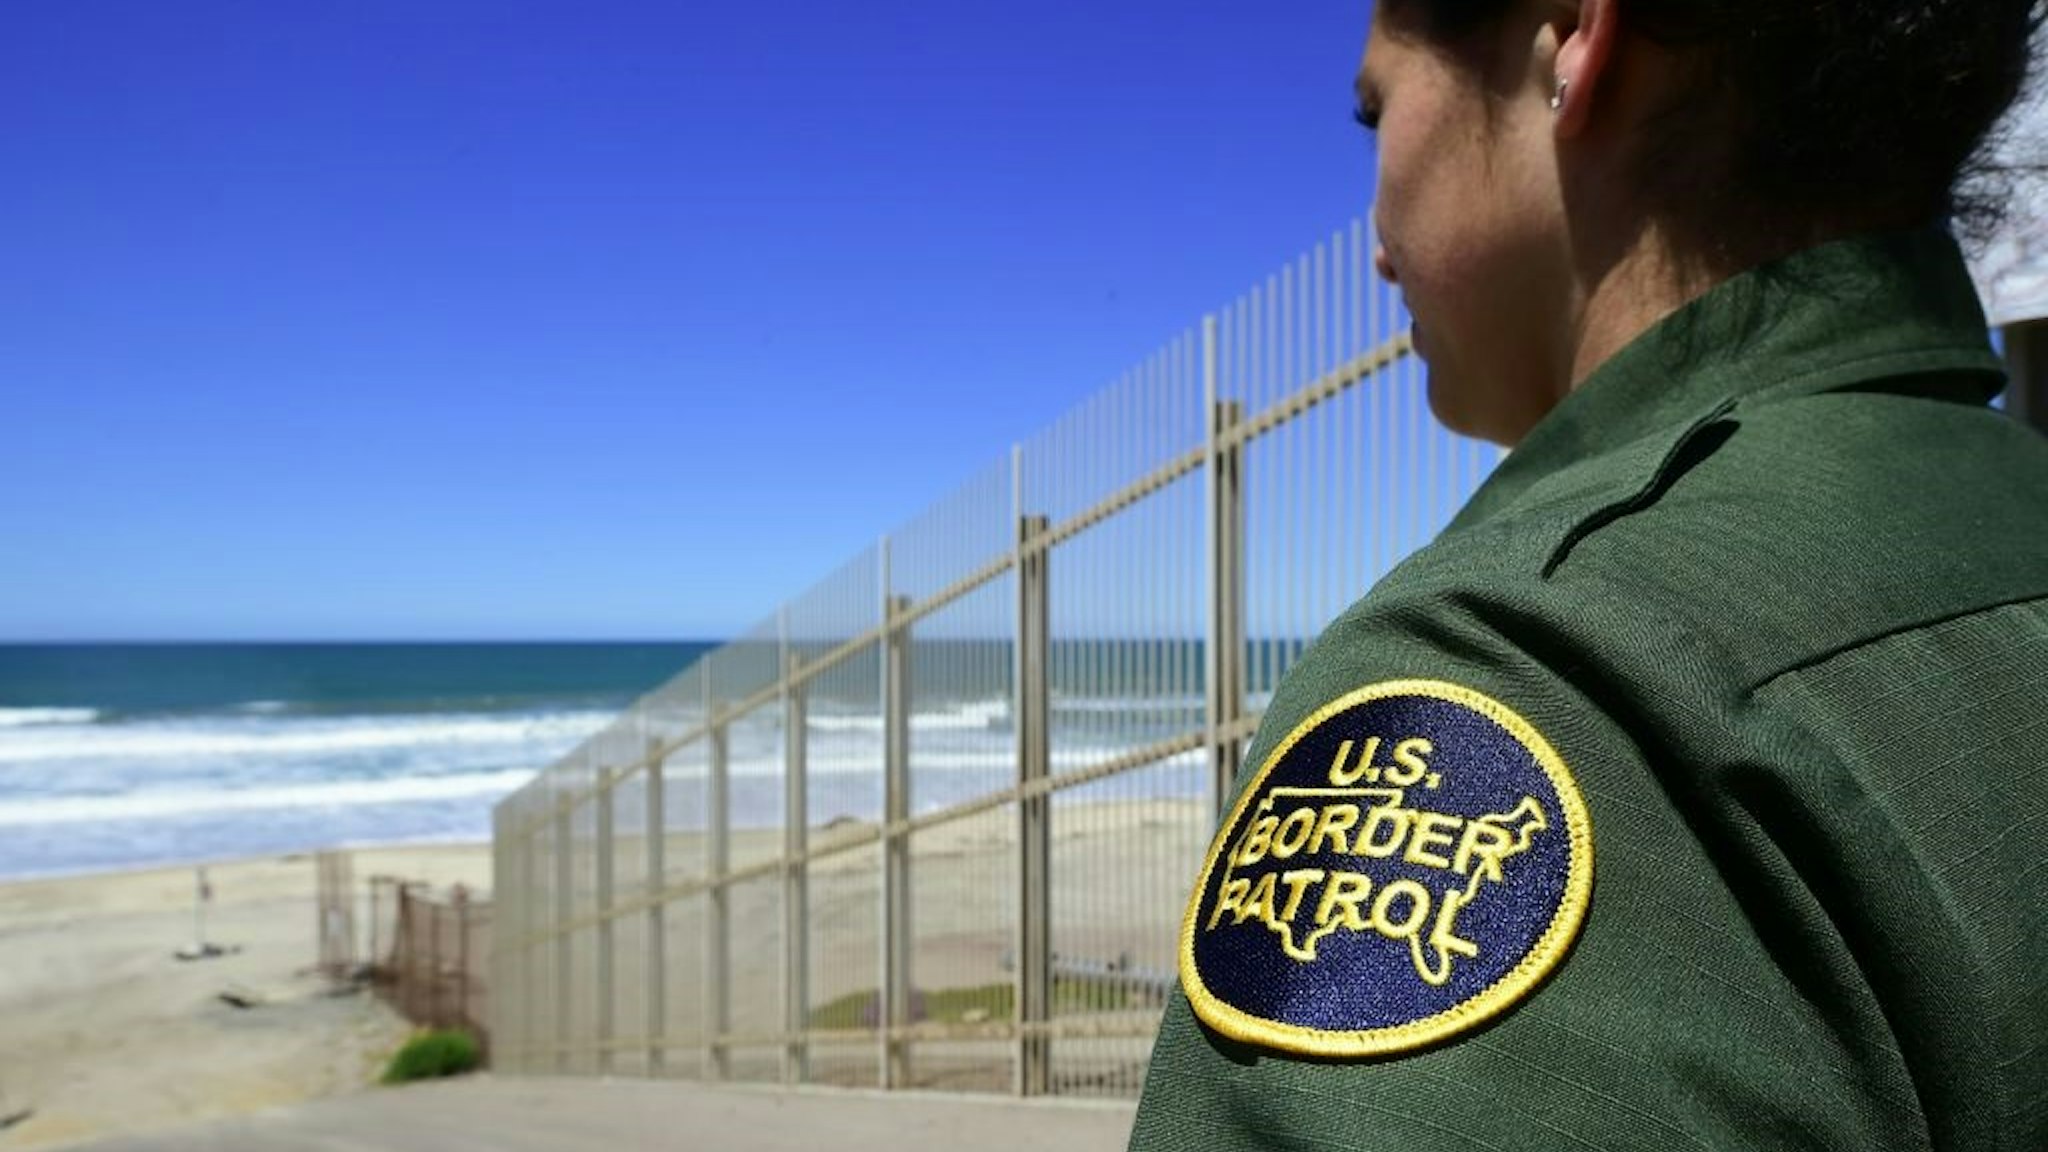 A US Customs and Border Protection agent looks toward the ocean from within the Border Infrastructure System, a no man's land area between the wall and fence which runs for 14 miles inland from the Pacific Ocean separating California from Mexico on April 17, 2018 in San Diego, California across from La Playa, Mexico a day after California rejected plans by the federal government for National Guard troops on the border.